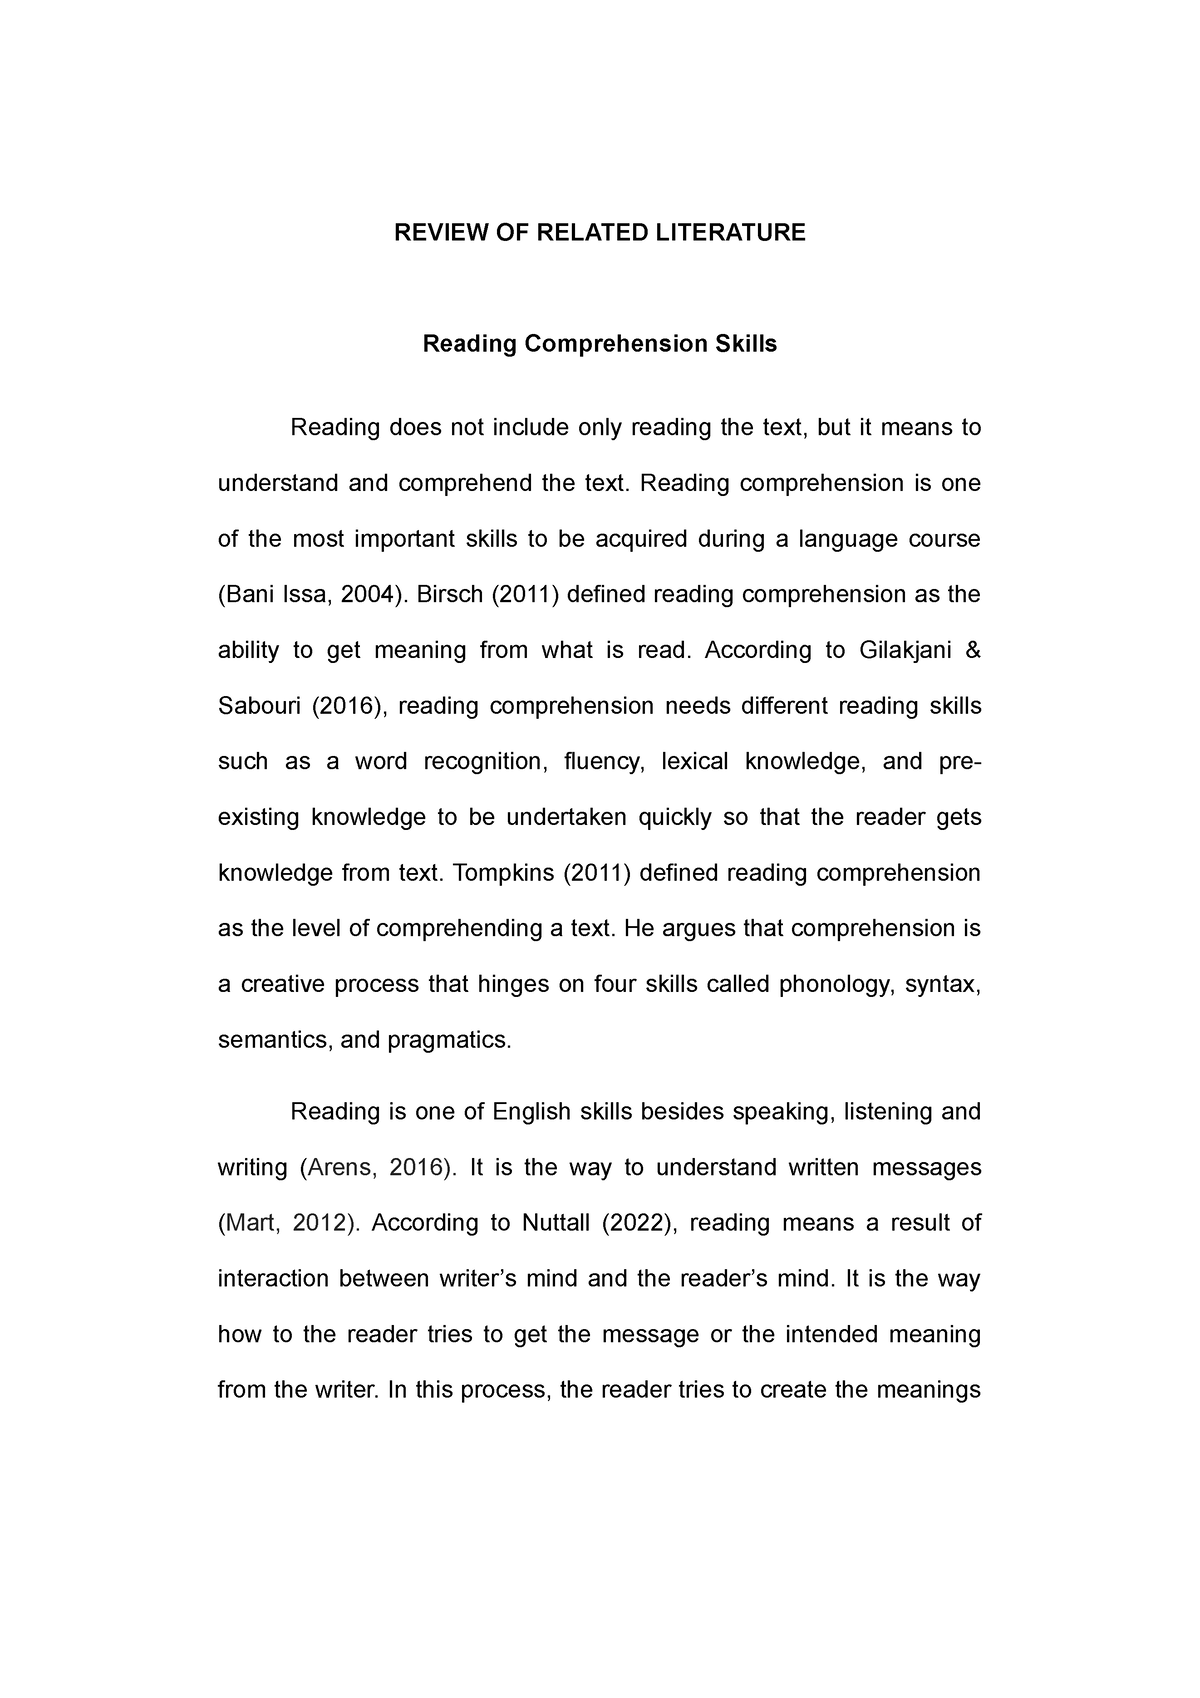 literature review on reading comprehension